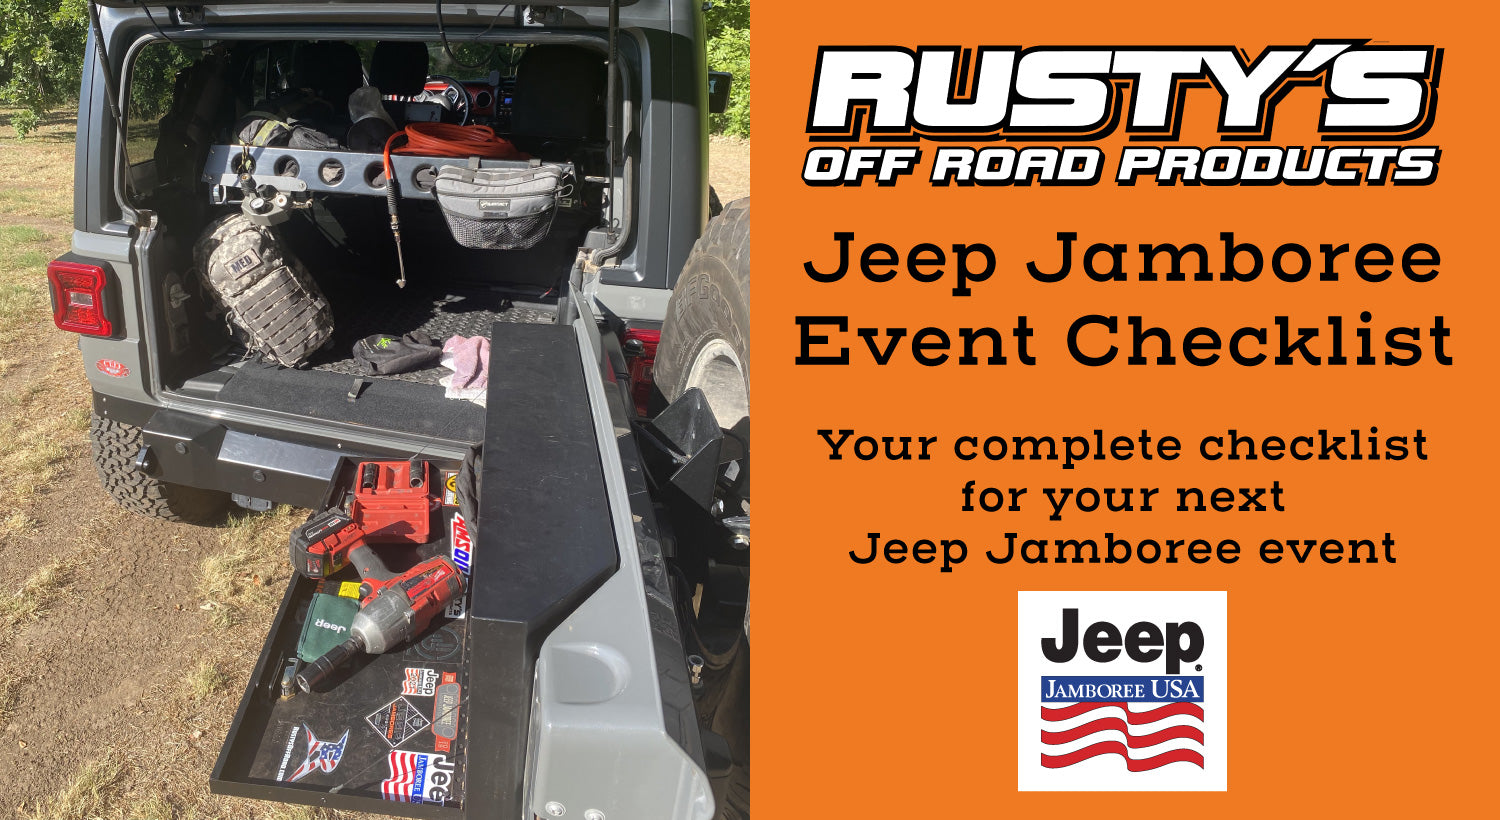 Jeep Jamboree Event Check List Rusty's OffRoad Products